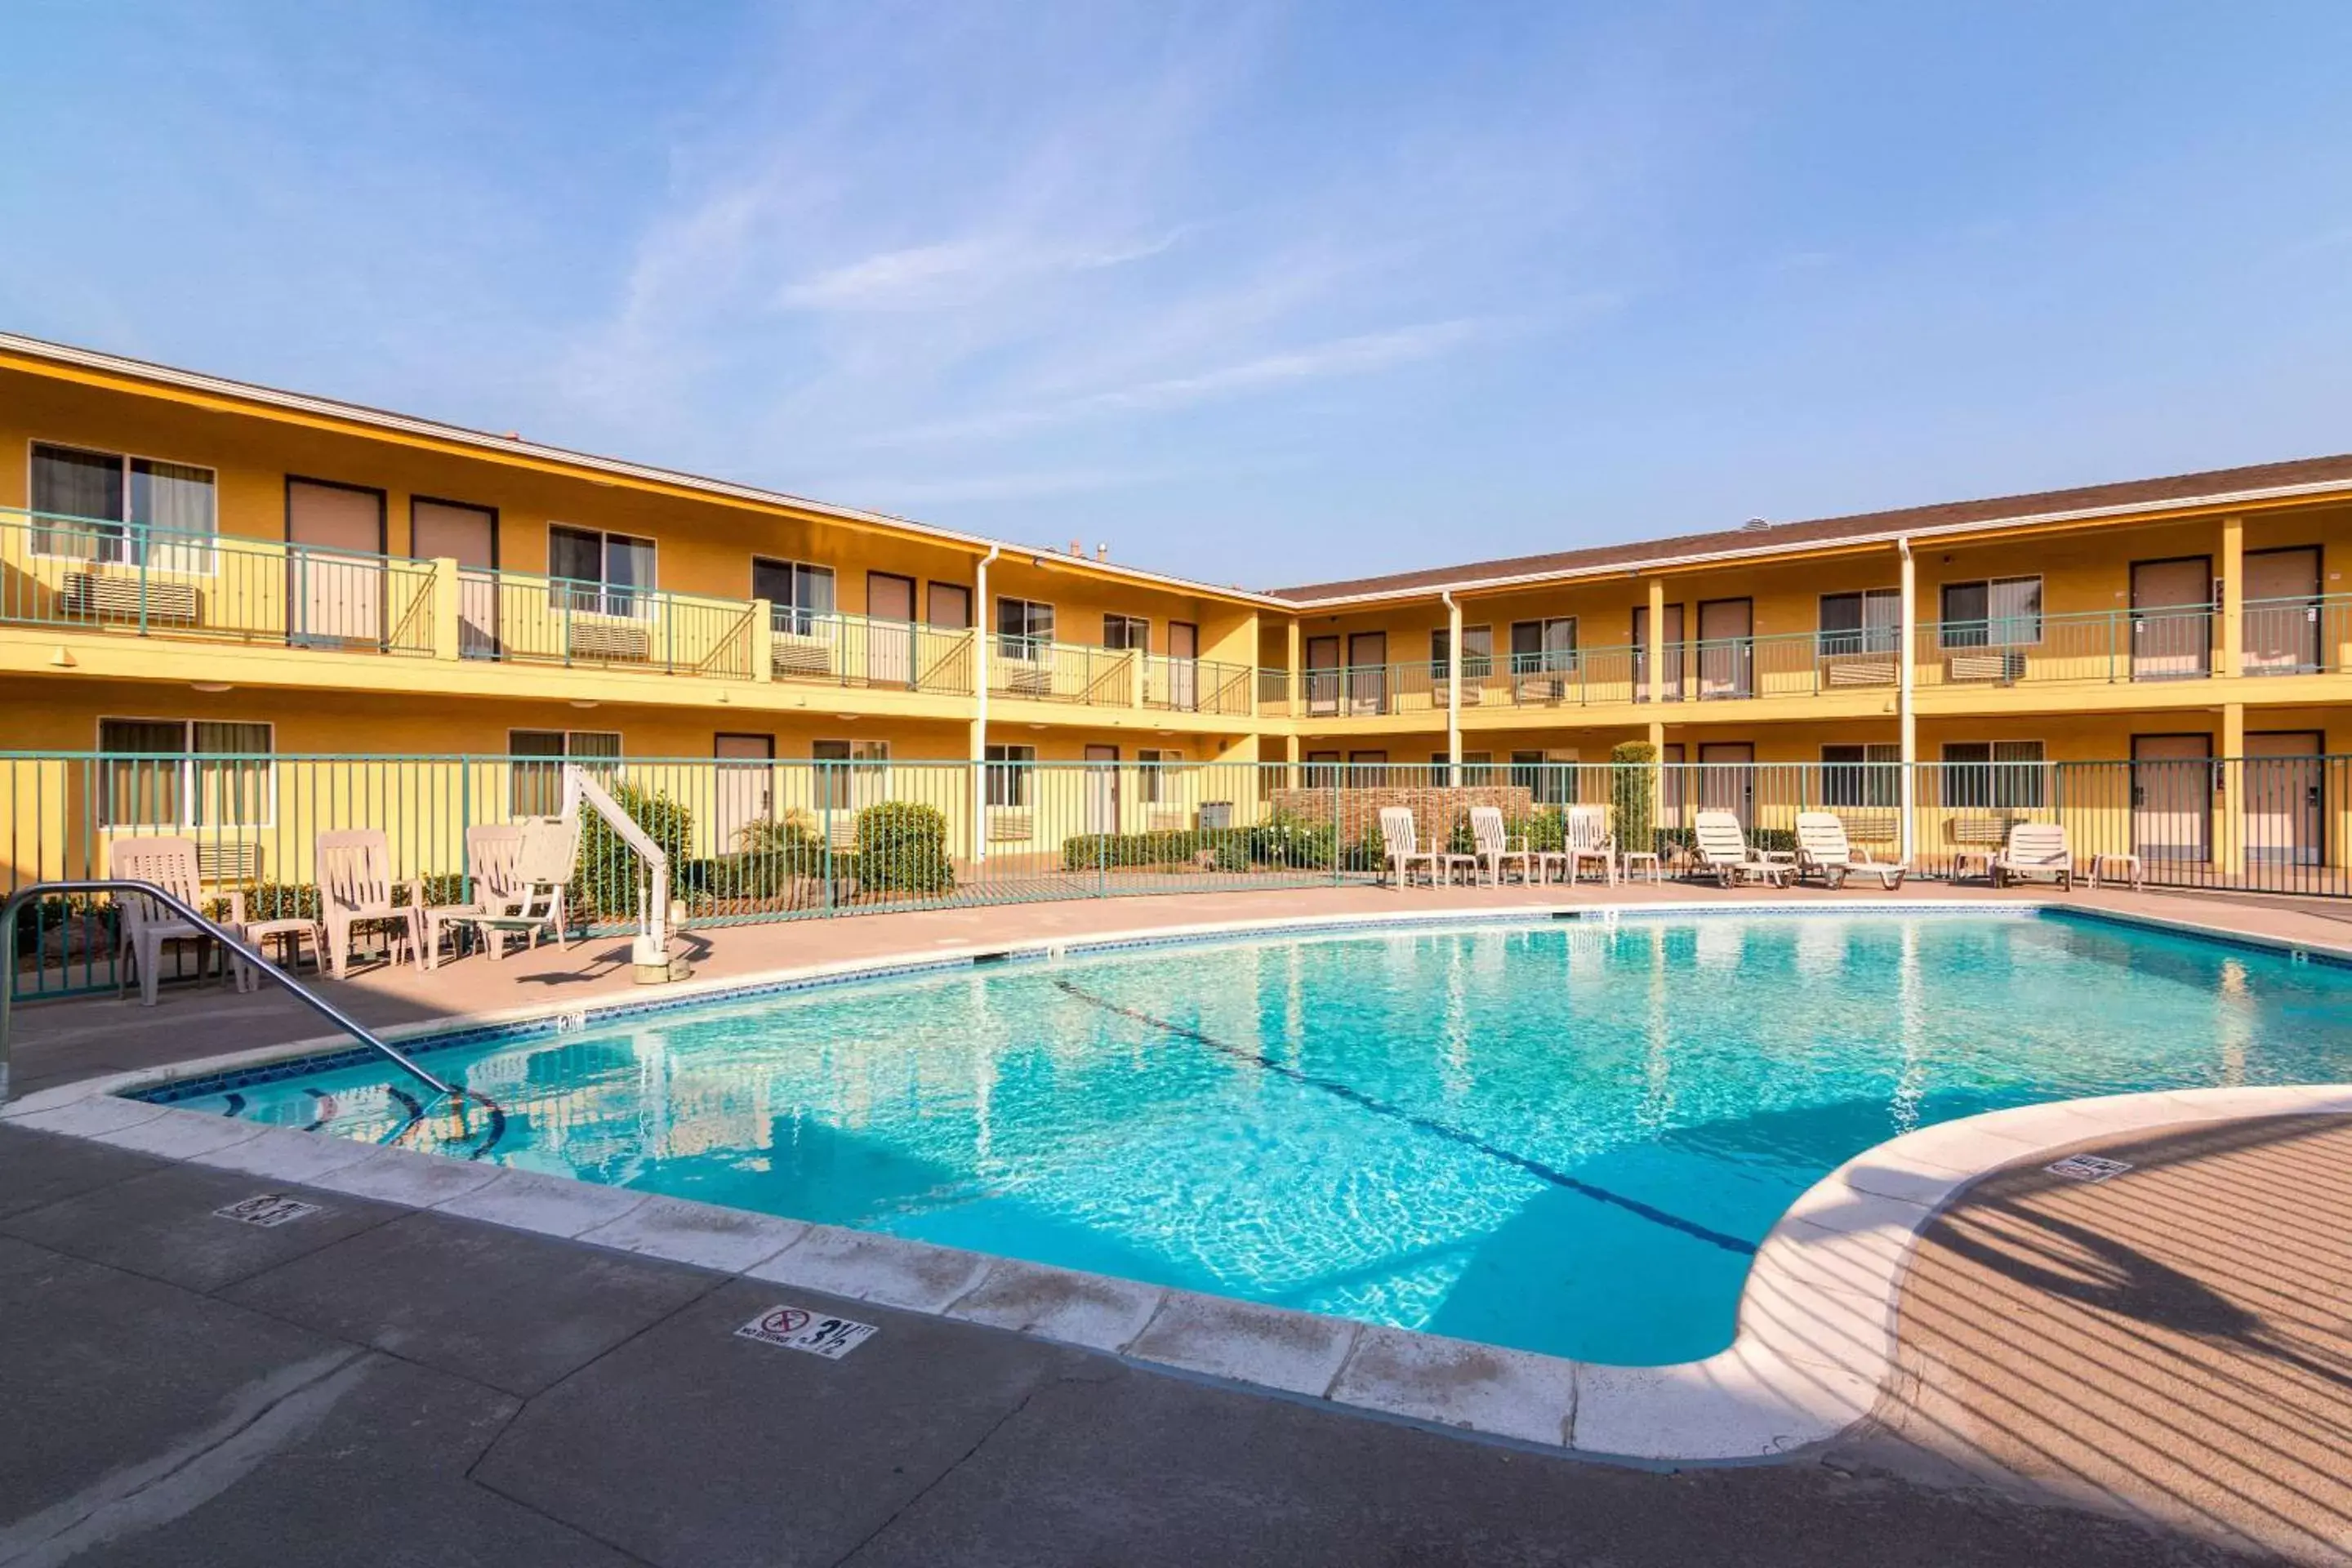 On site, Property Building in Quality Inn & Suites near Downtown Bakersfield